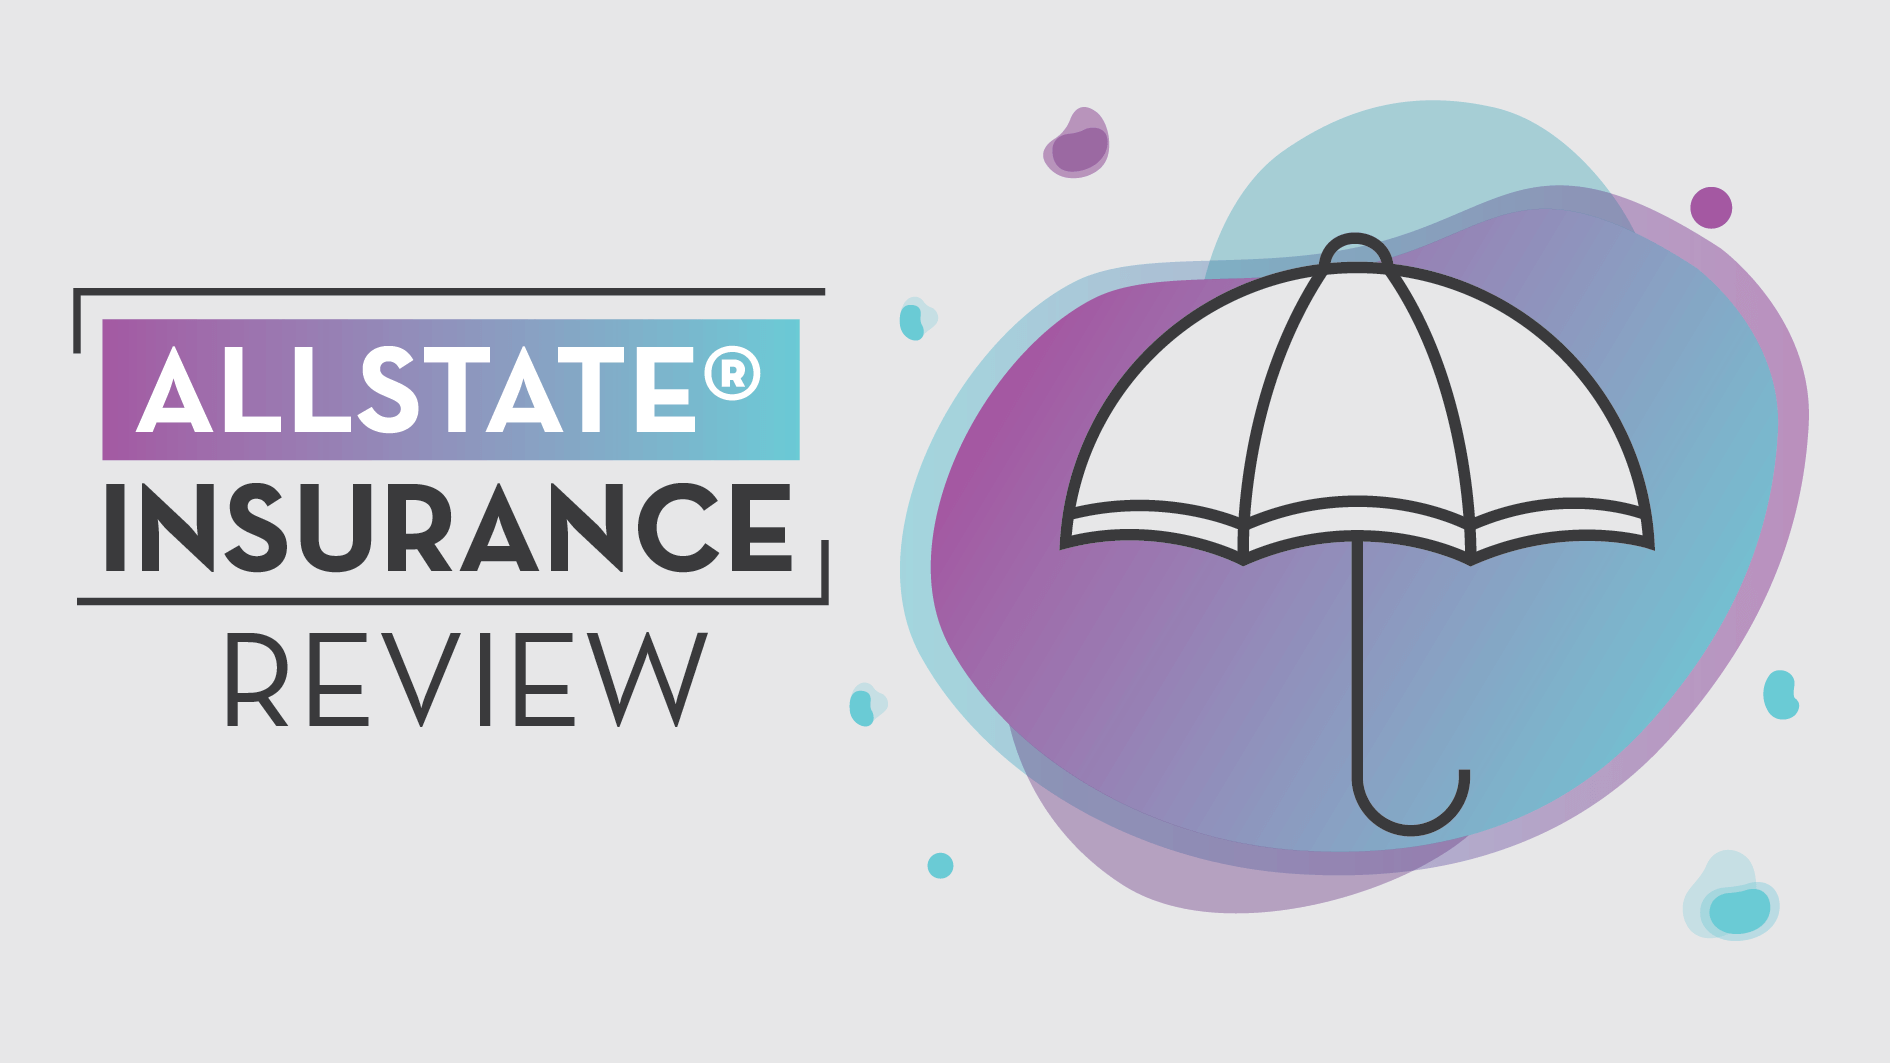 Allstate® Insurance Review